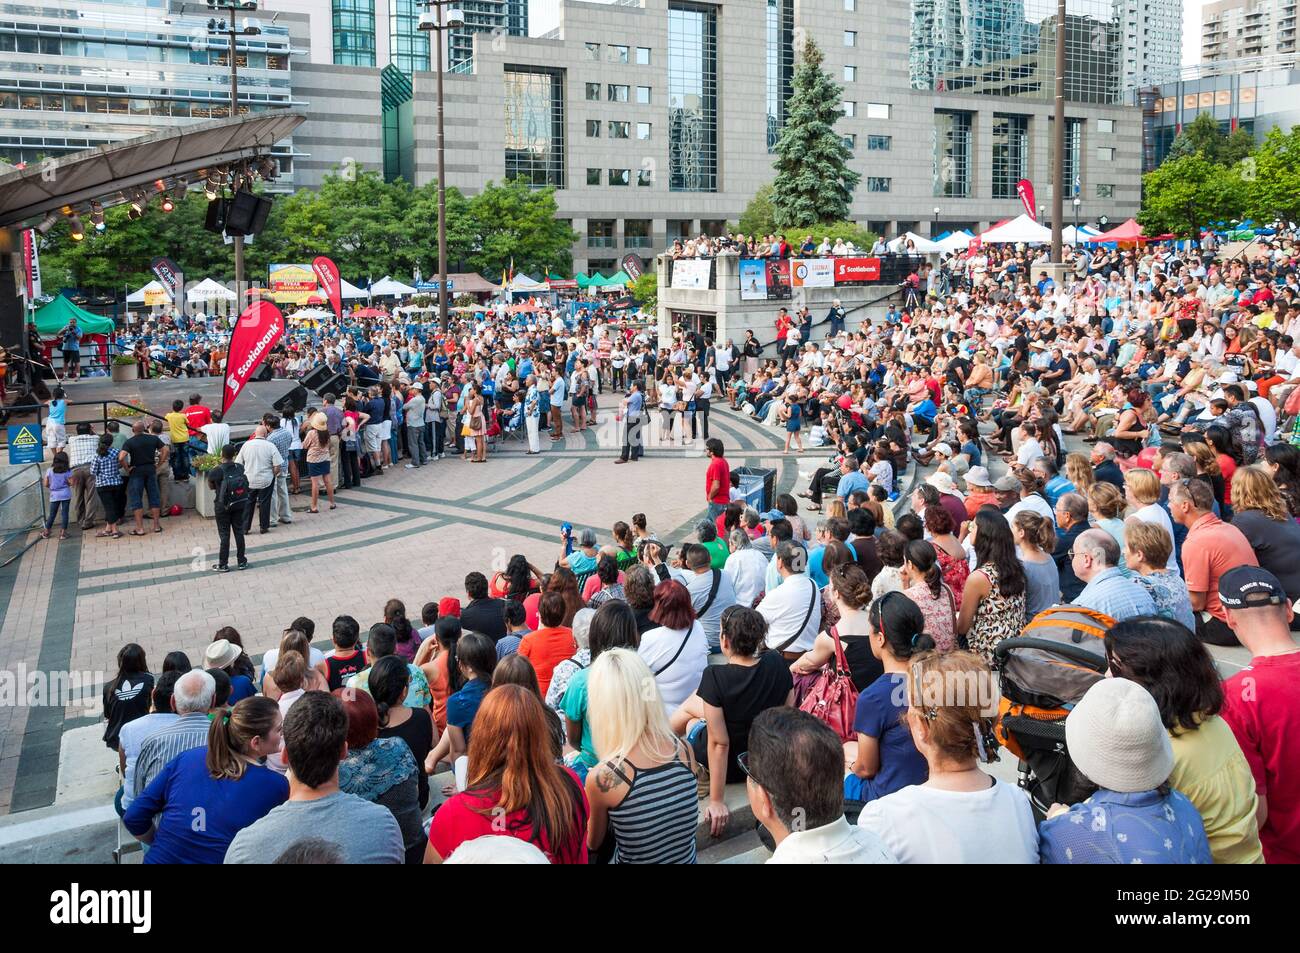 General View of the Attending Public: Hispanic Fiesta is a celebration of the Latin American culture in this multicultural city, it brings together th Stock Photo